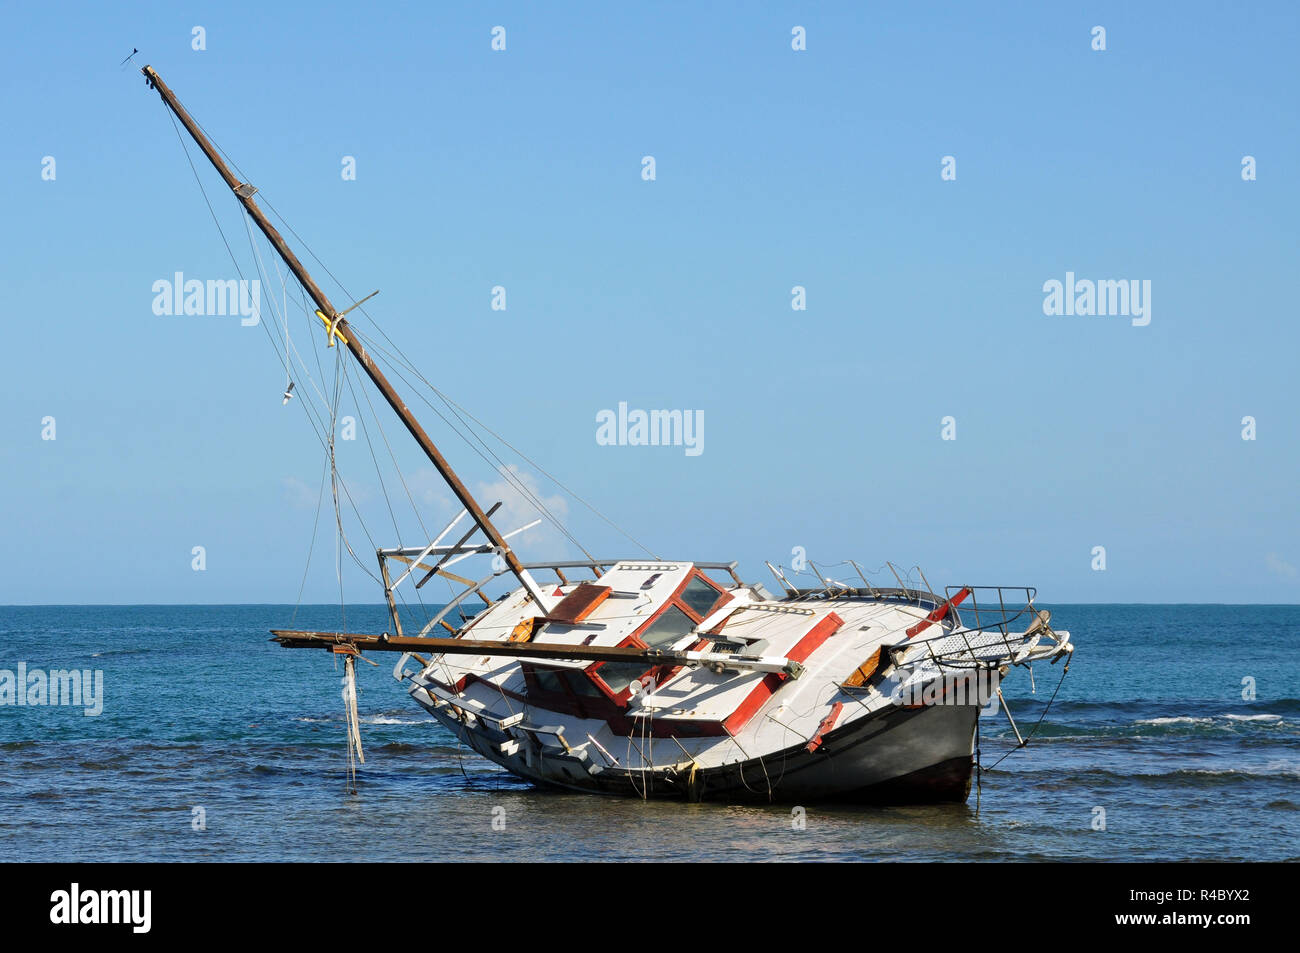 Sailboat run aground a Tipped Over Stock Photo